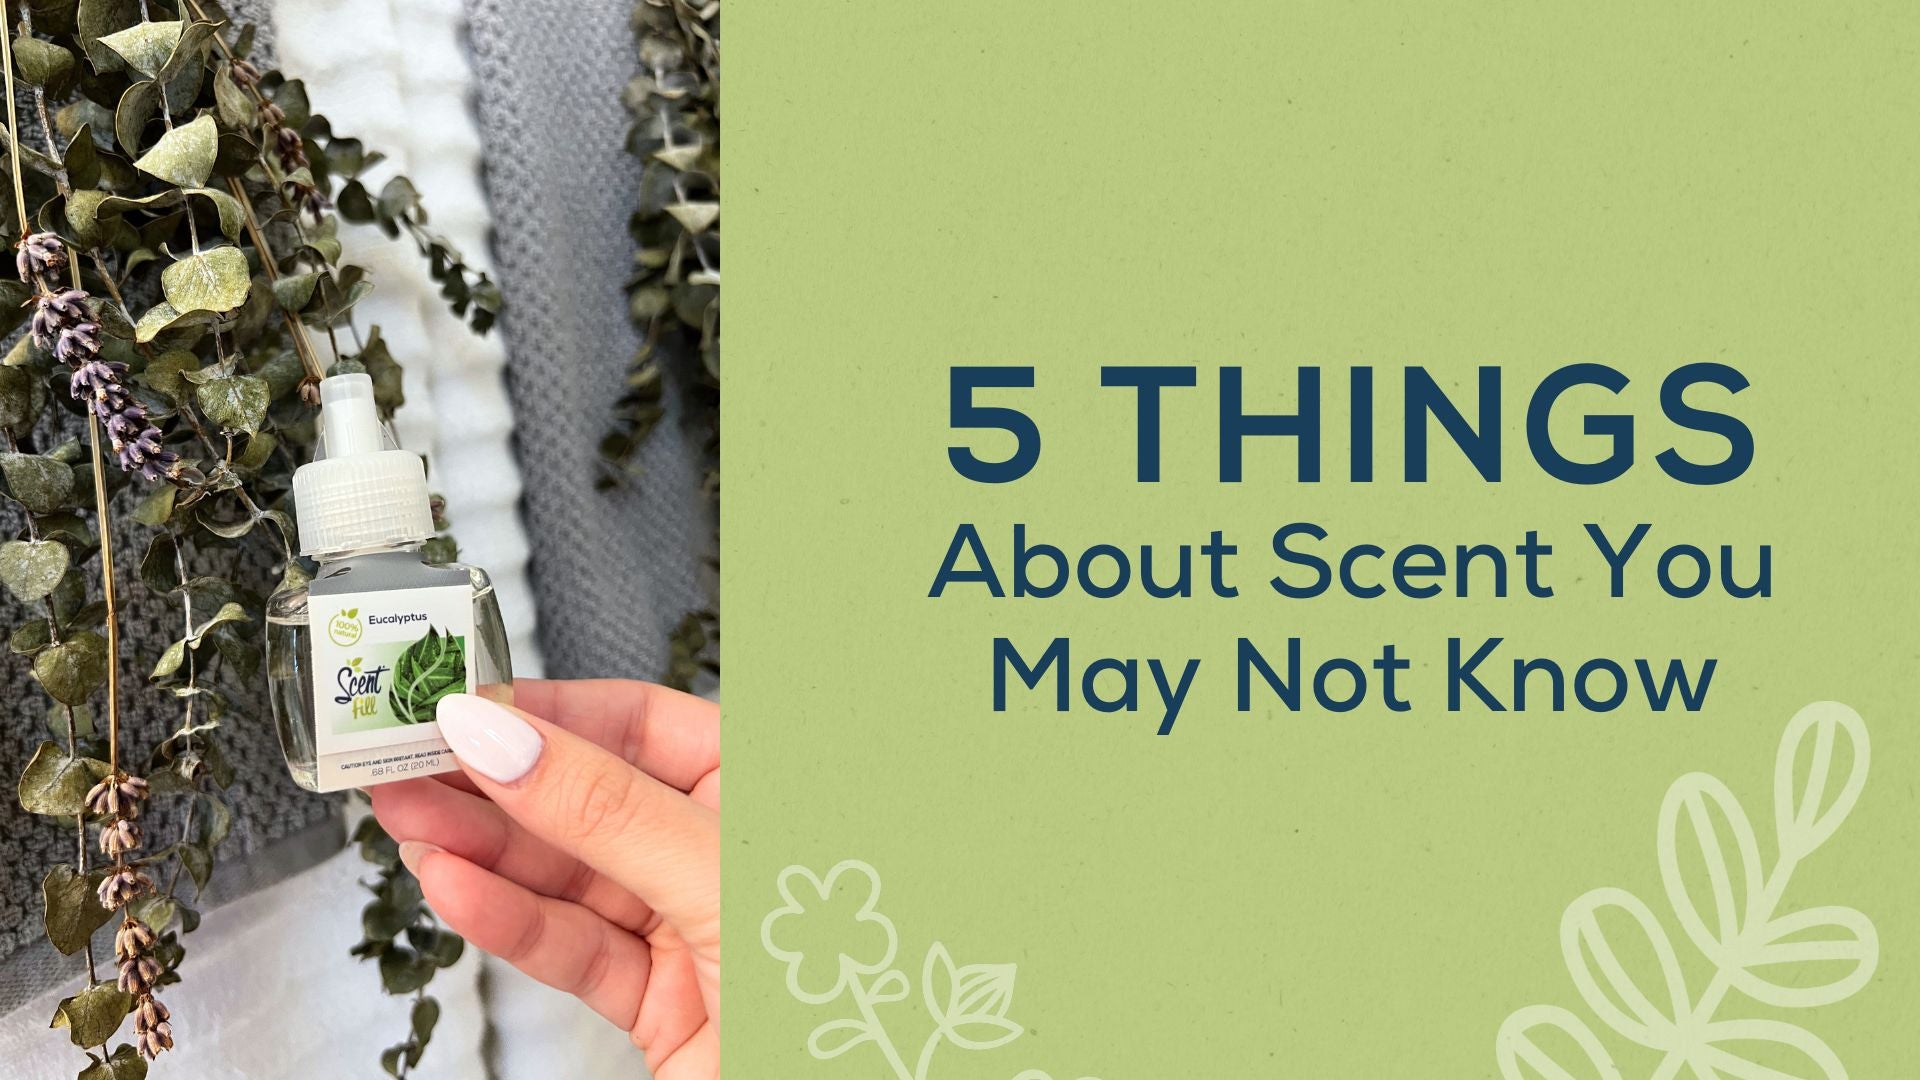 5 Surprising Facts About Scent That Will Blow Your Mind